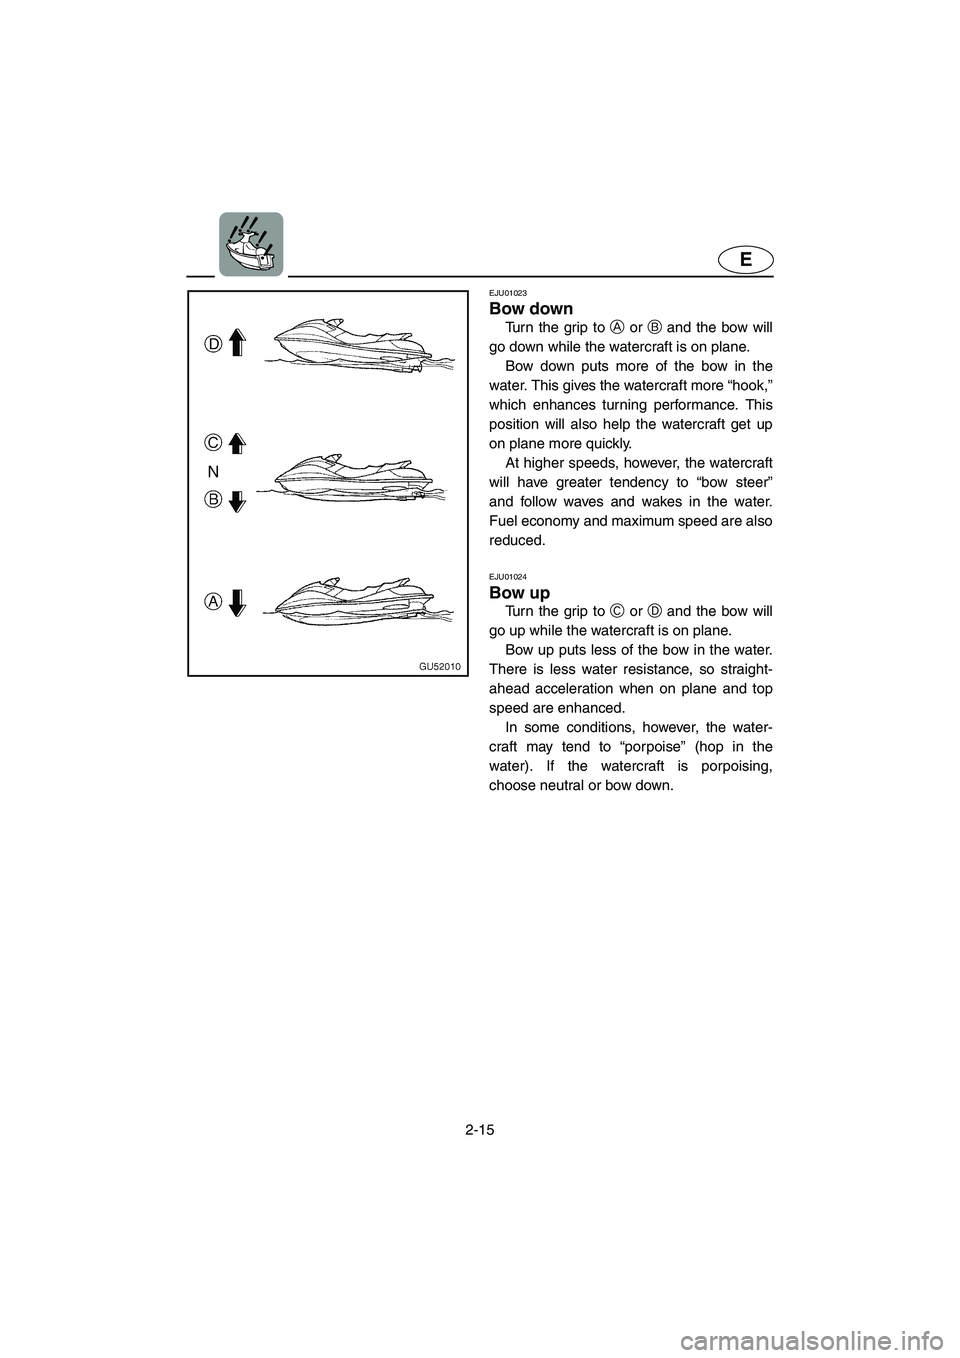 YAMAHA SUV 1200 2003 Owners Guide 2-15
E
EJU01023 
Bow down  
Turn the grip to A or B and the bow will
go down while the watercraft is on plane. 
Bow down puts more of the bow in the
water. This gives the watercraft more “hook,”
w